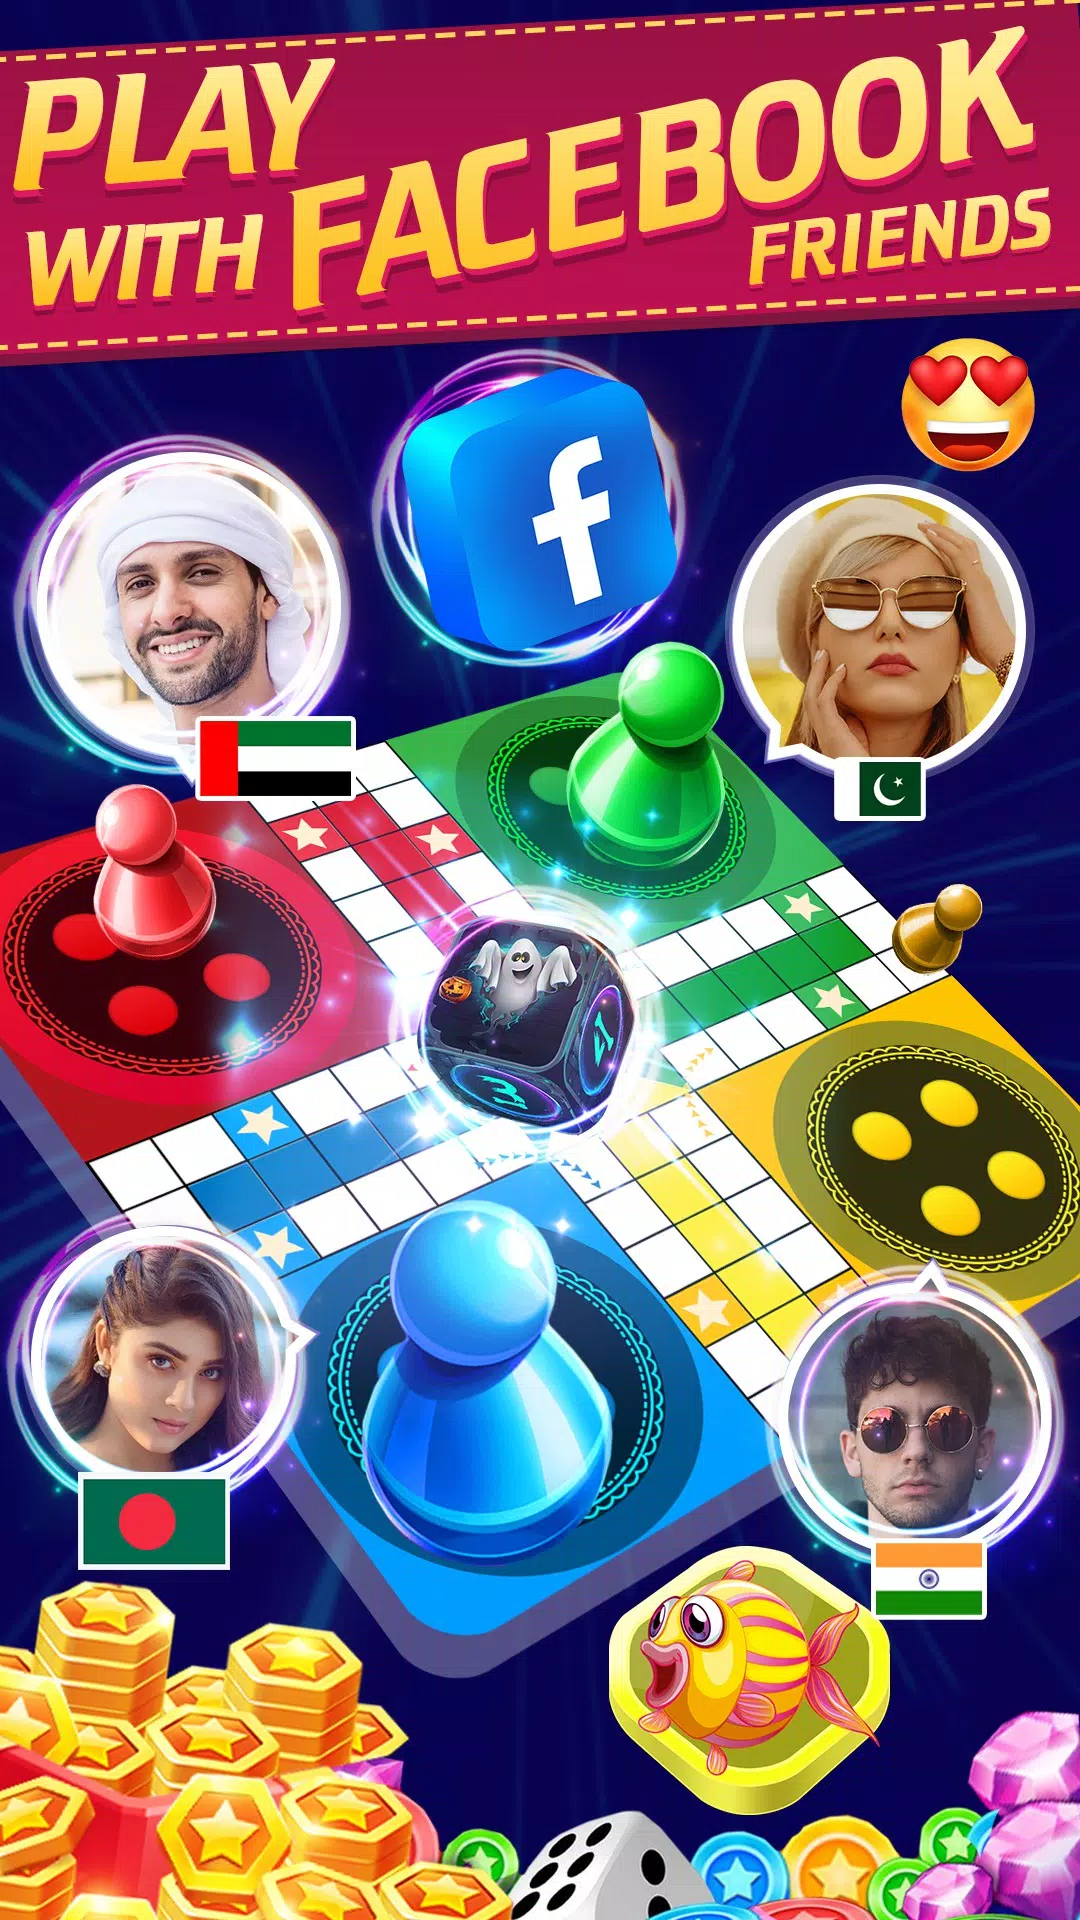 Download Ludo Online Game Multiplayer on PC with MEmu